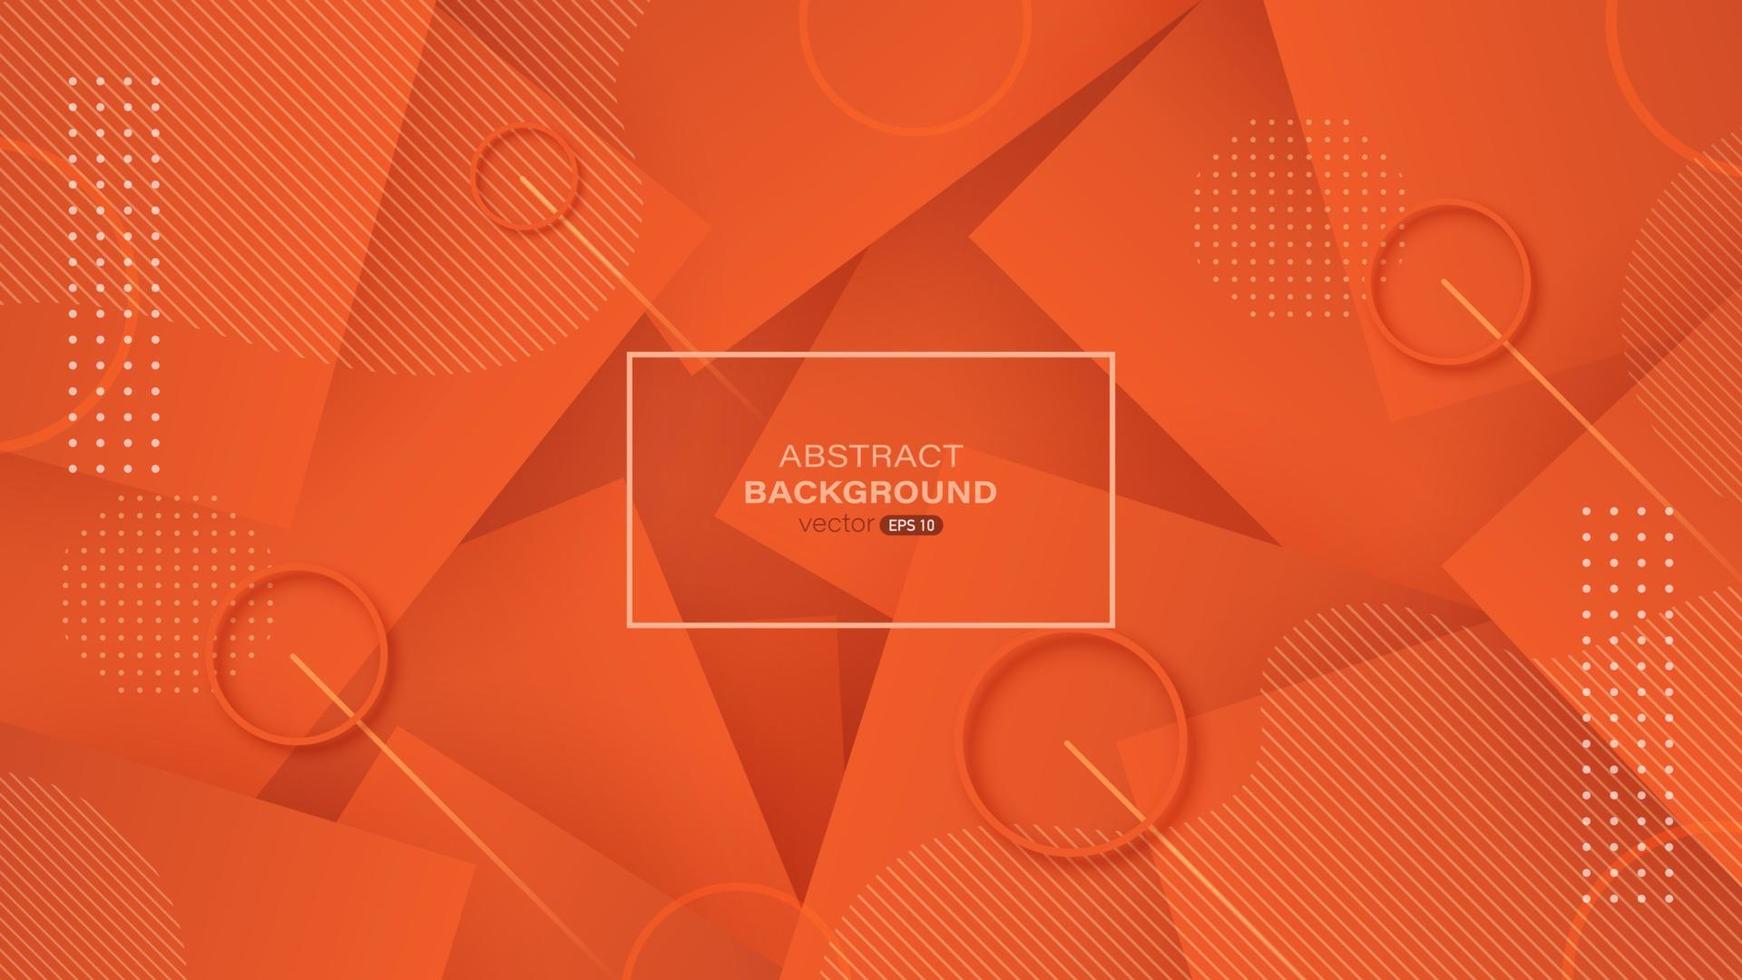 Orange square abstract background design vector